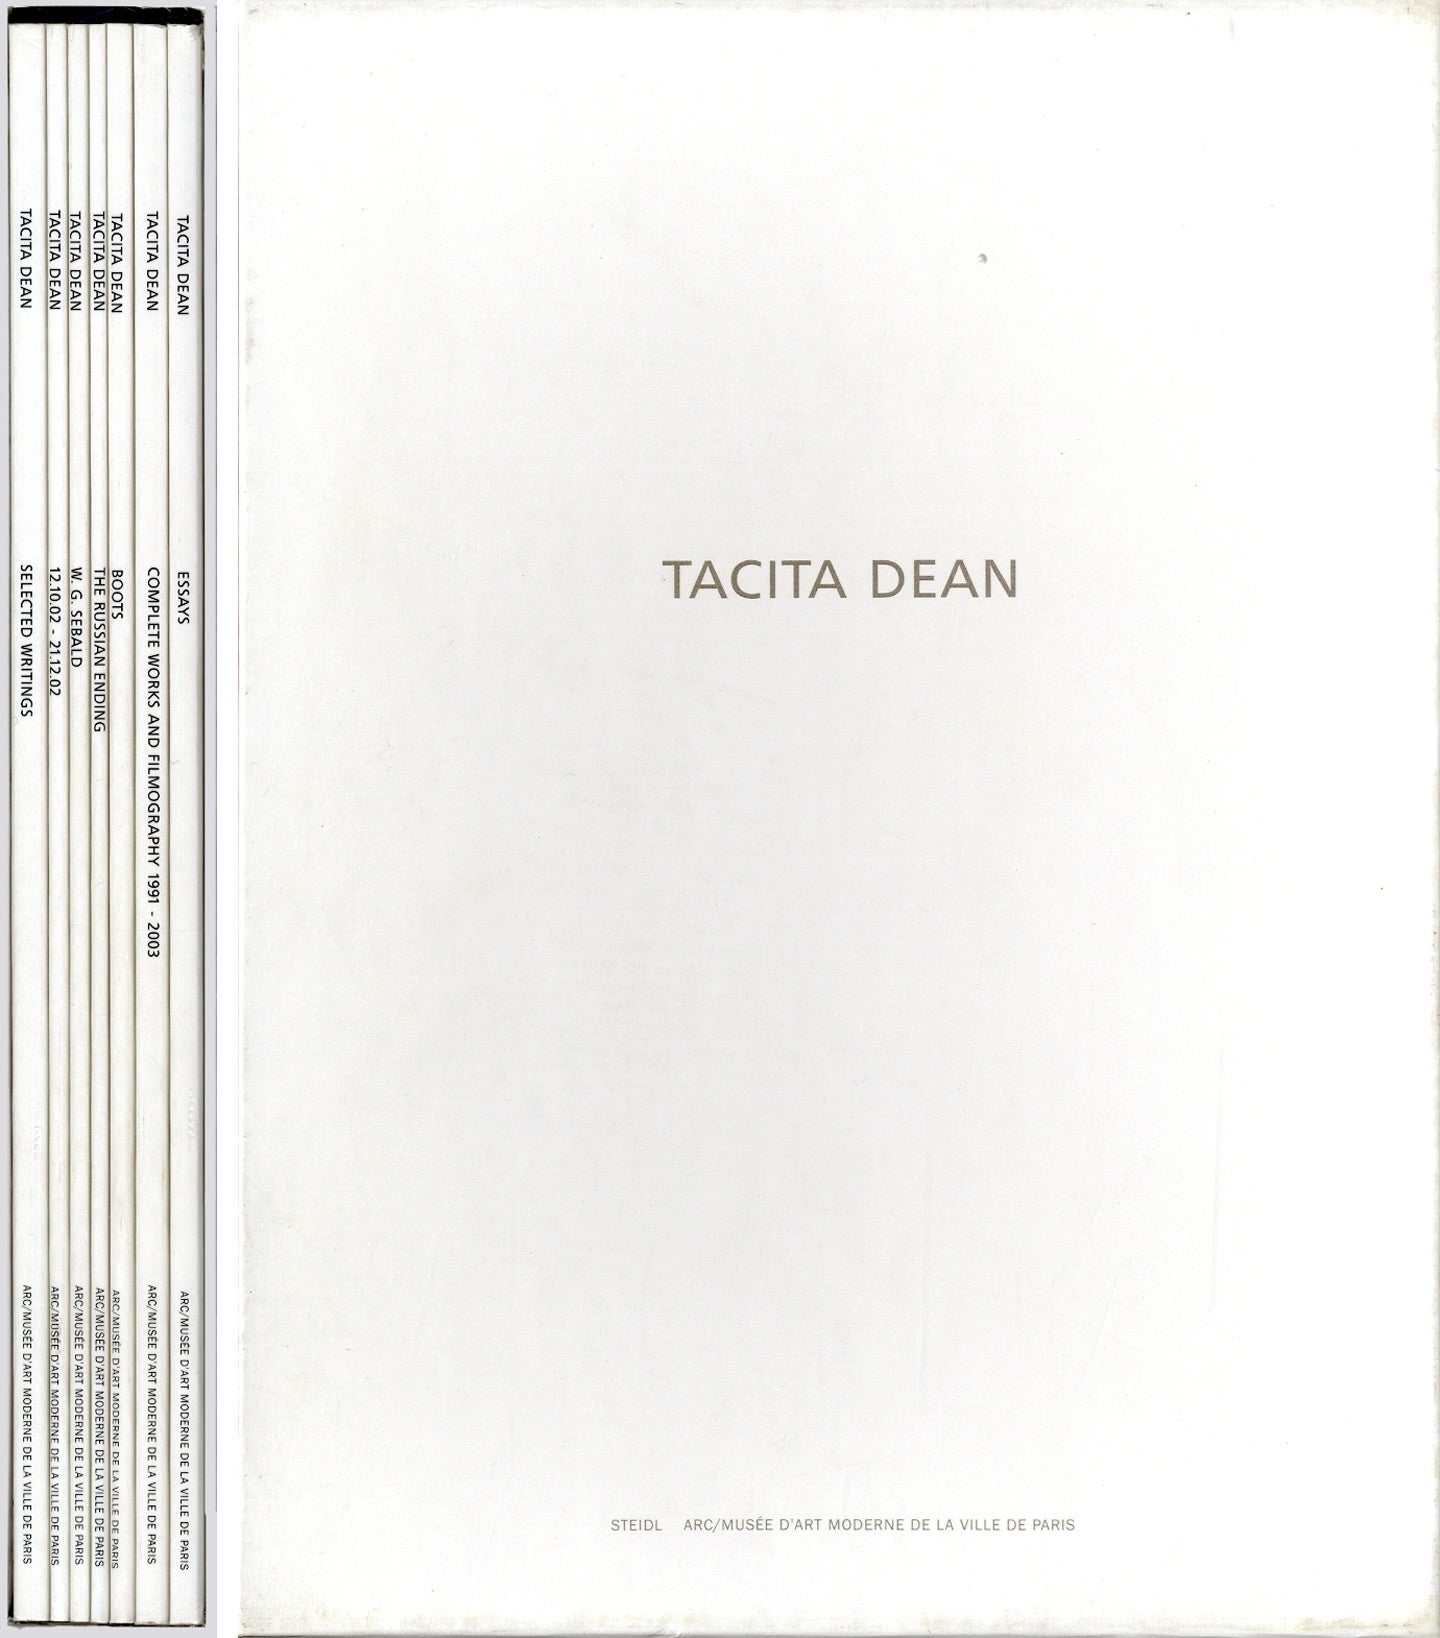 Tacita Dean: Seven Books (Selected Writings, 12.10.02 - 21.12.02, W.G. Sebald, The Russian Ending, Boots, Complete Works and Filmography 1991-2003, and Essays)